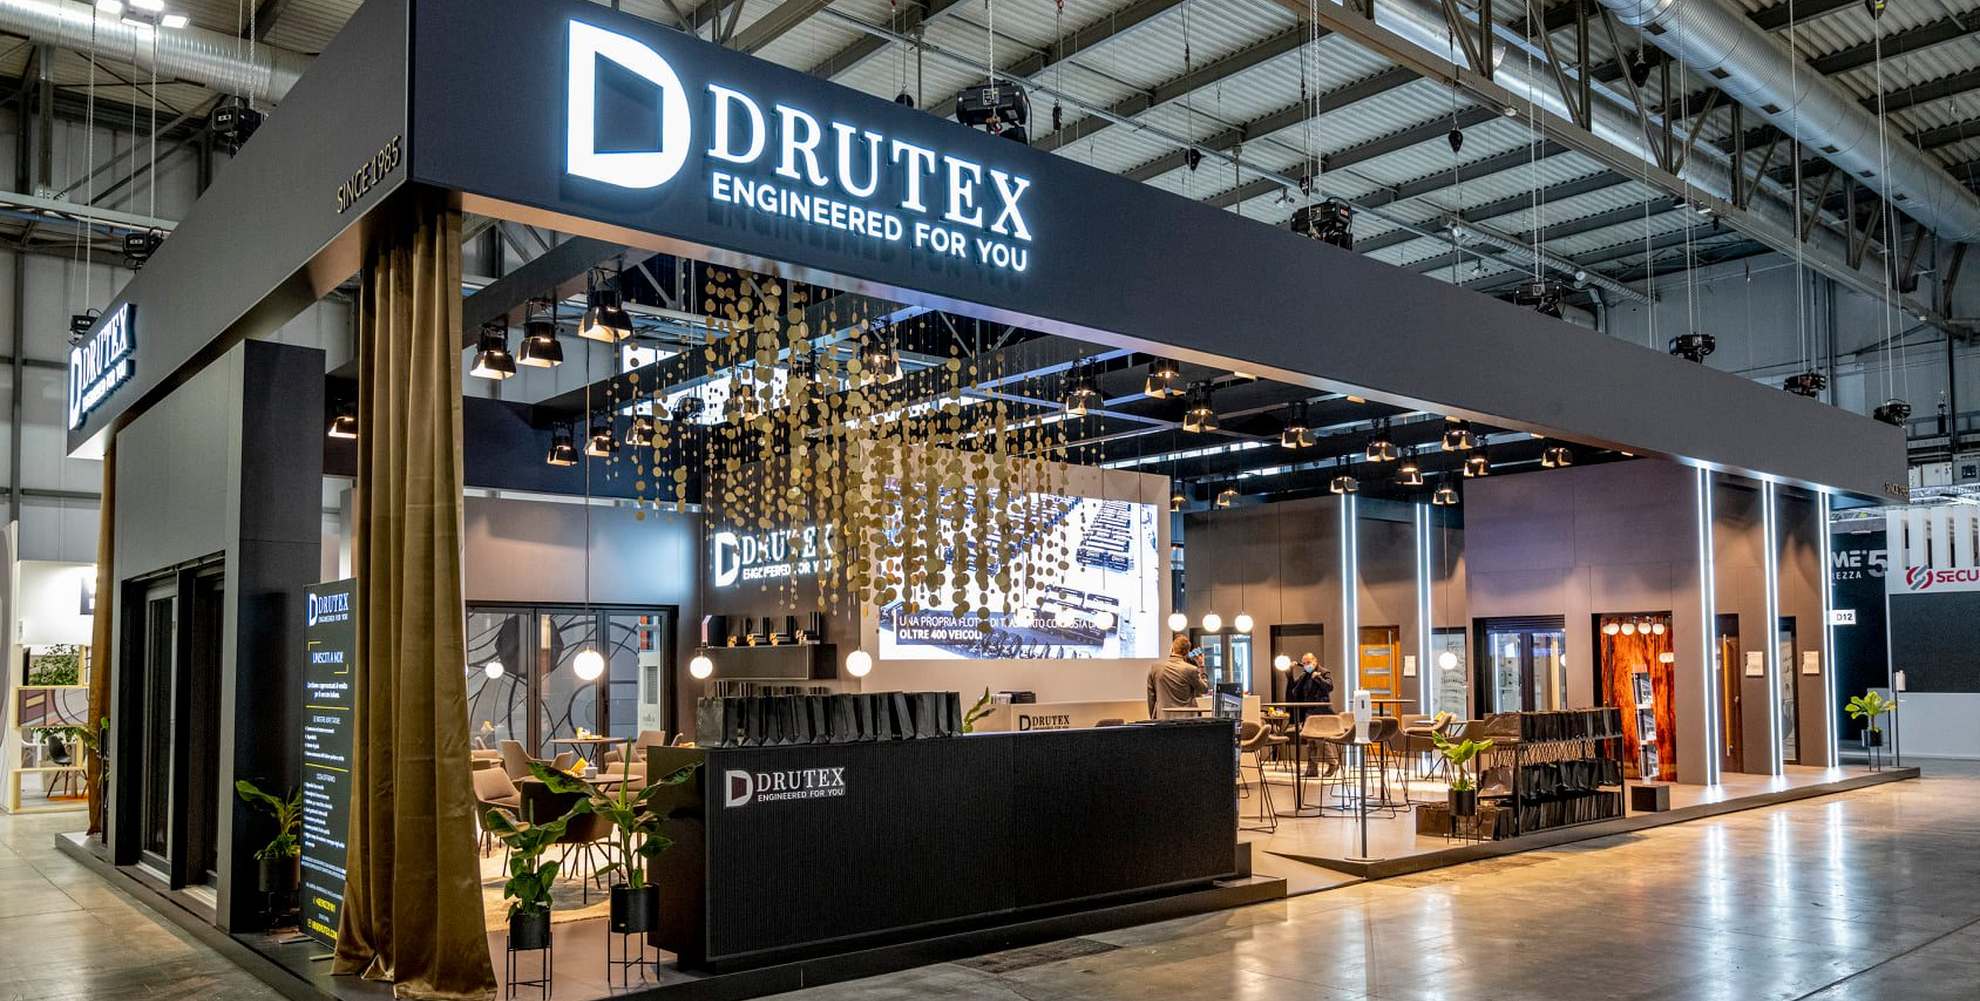 Record interest in DRUTEX offer at the MADE expo